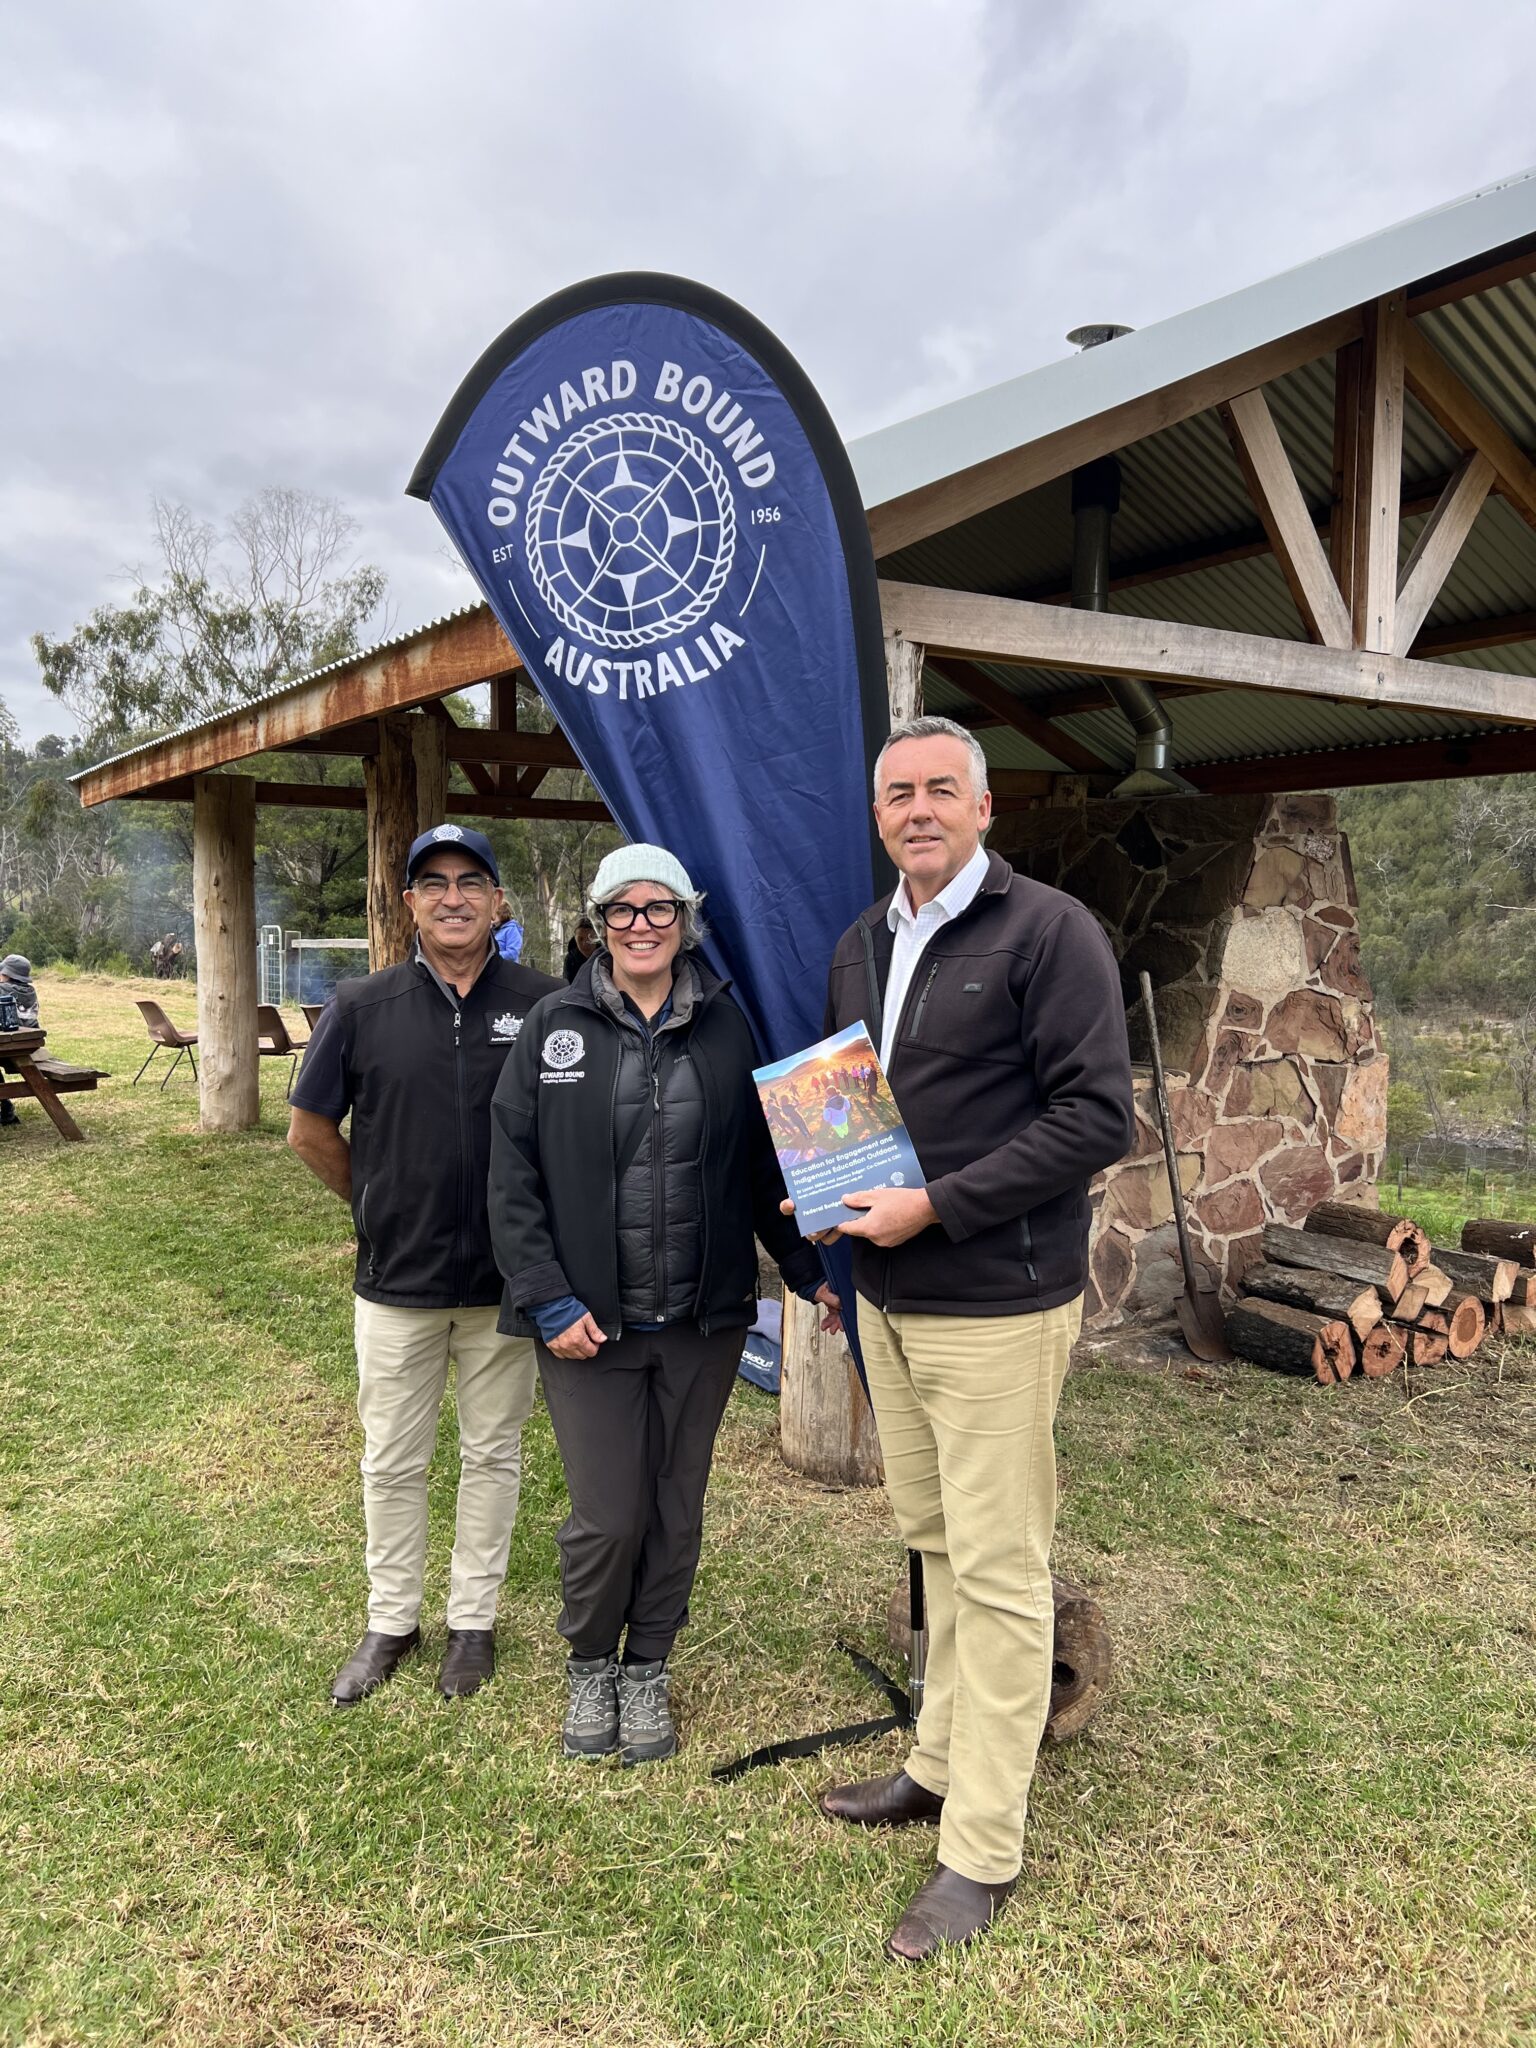 National Emergency Management Australia's Gippsland Coordination Planning Officer Joe Rettino, Outward Bound co-chair Dr Loren Miller and Federal Member for Gippsland Darren Chester at one of the new shelters which was built following the Black Summer bushfires.